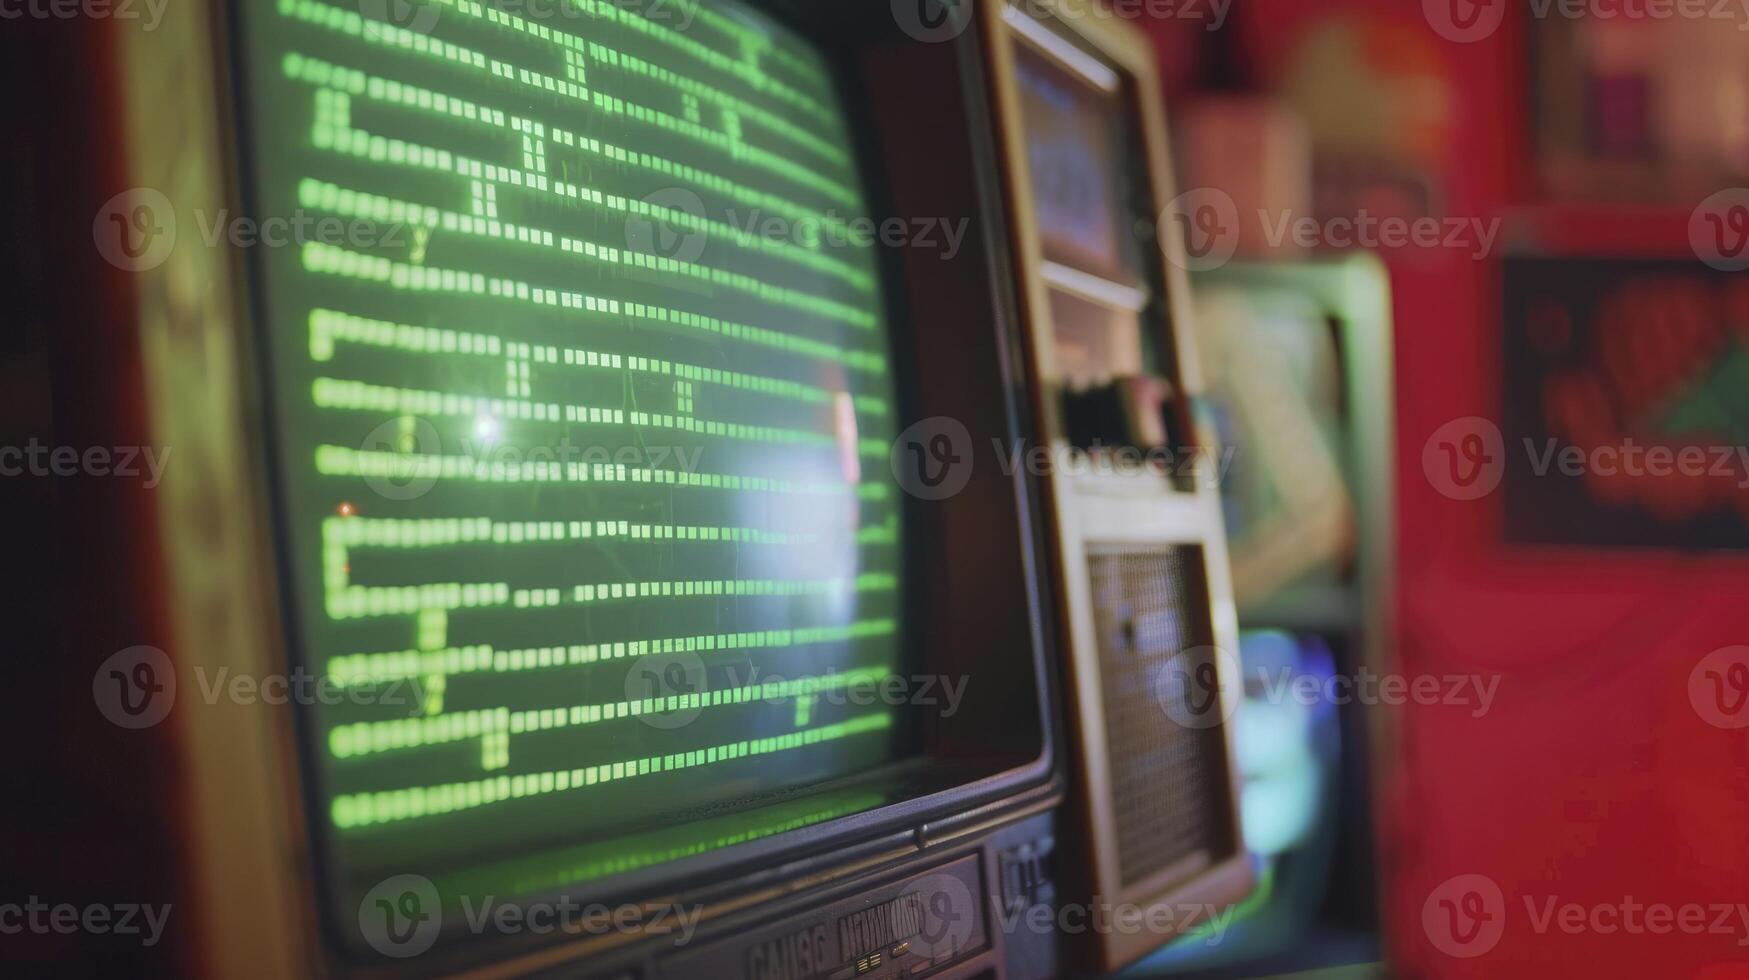 AI generated Retro Gaming Vibes. Close-Up of Eighties Inspired Console Arcade Video Game on a Vintage TV Screen. Player Anticipates New Level as Green Progress Bar Moves. photo